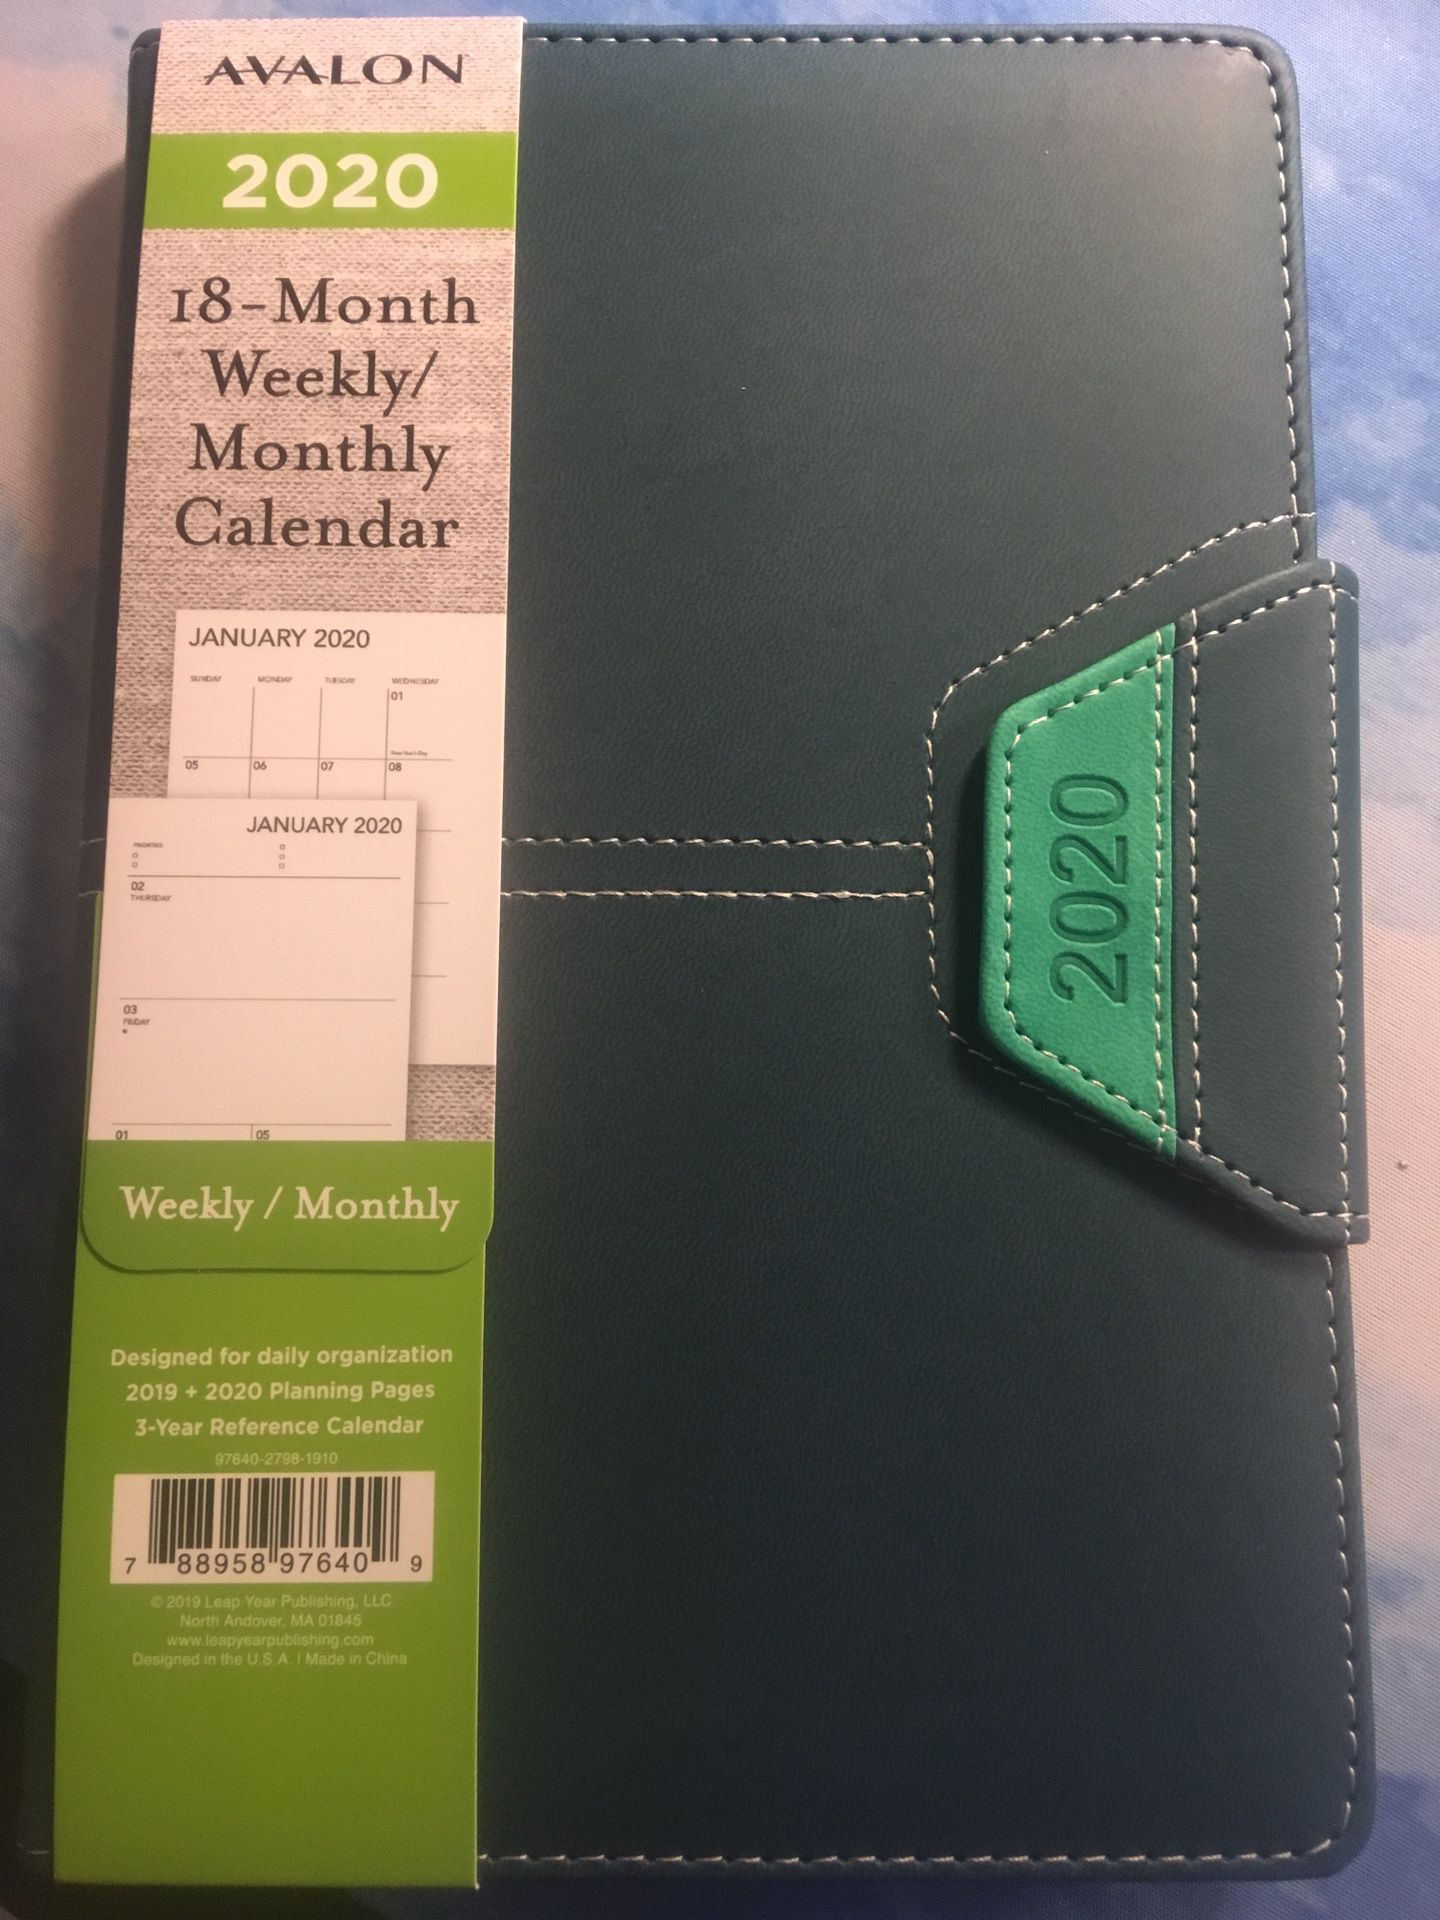 2020 Avalon 18-Month Weekly|Monthly Calendar